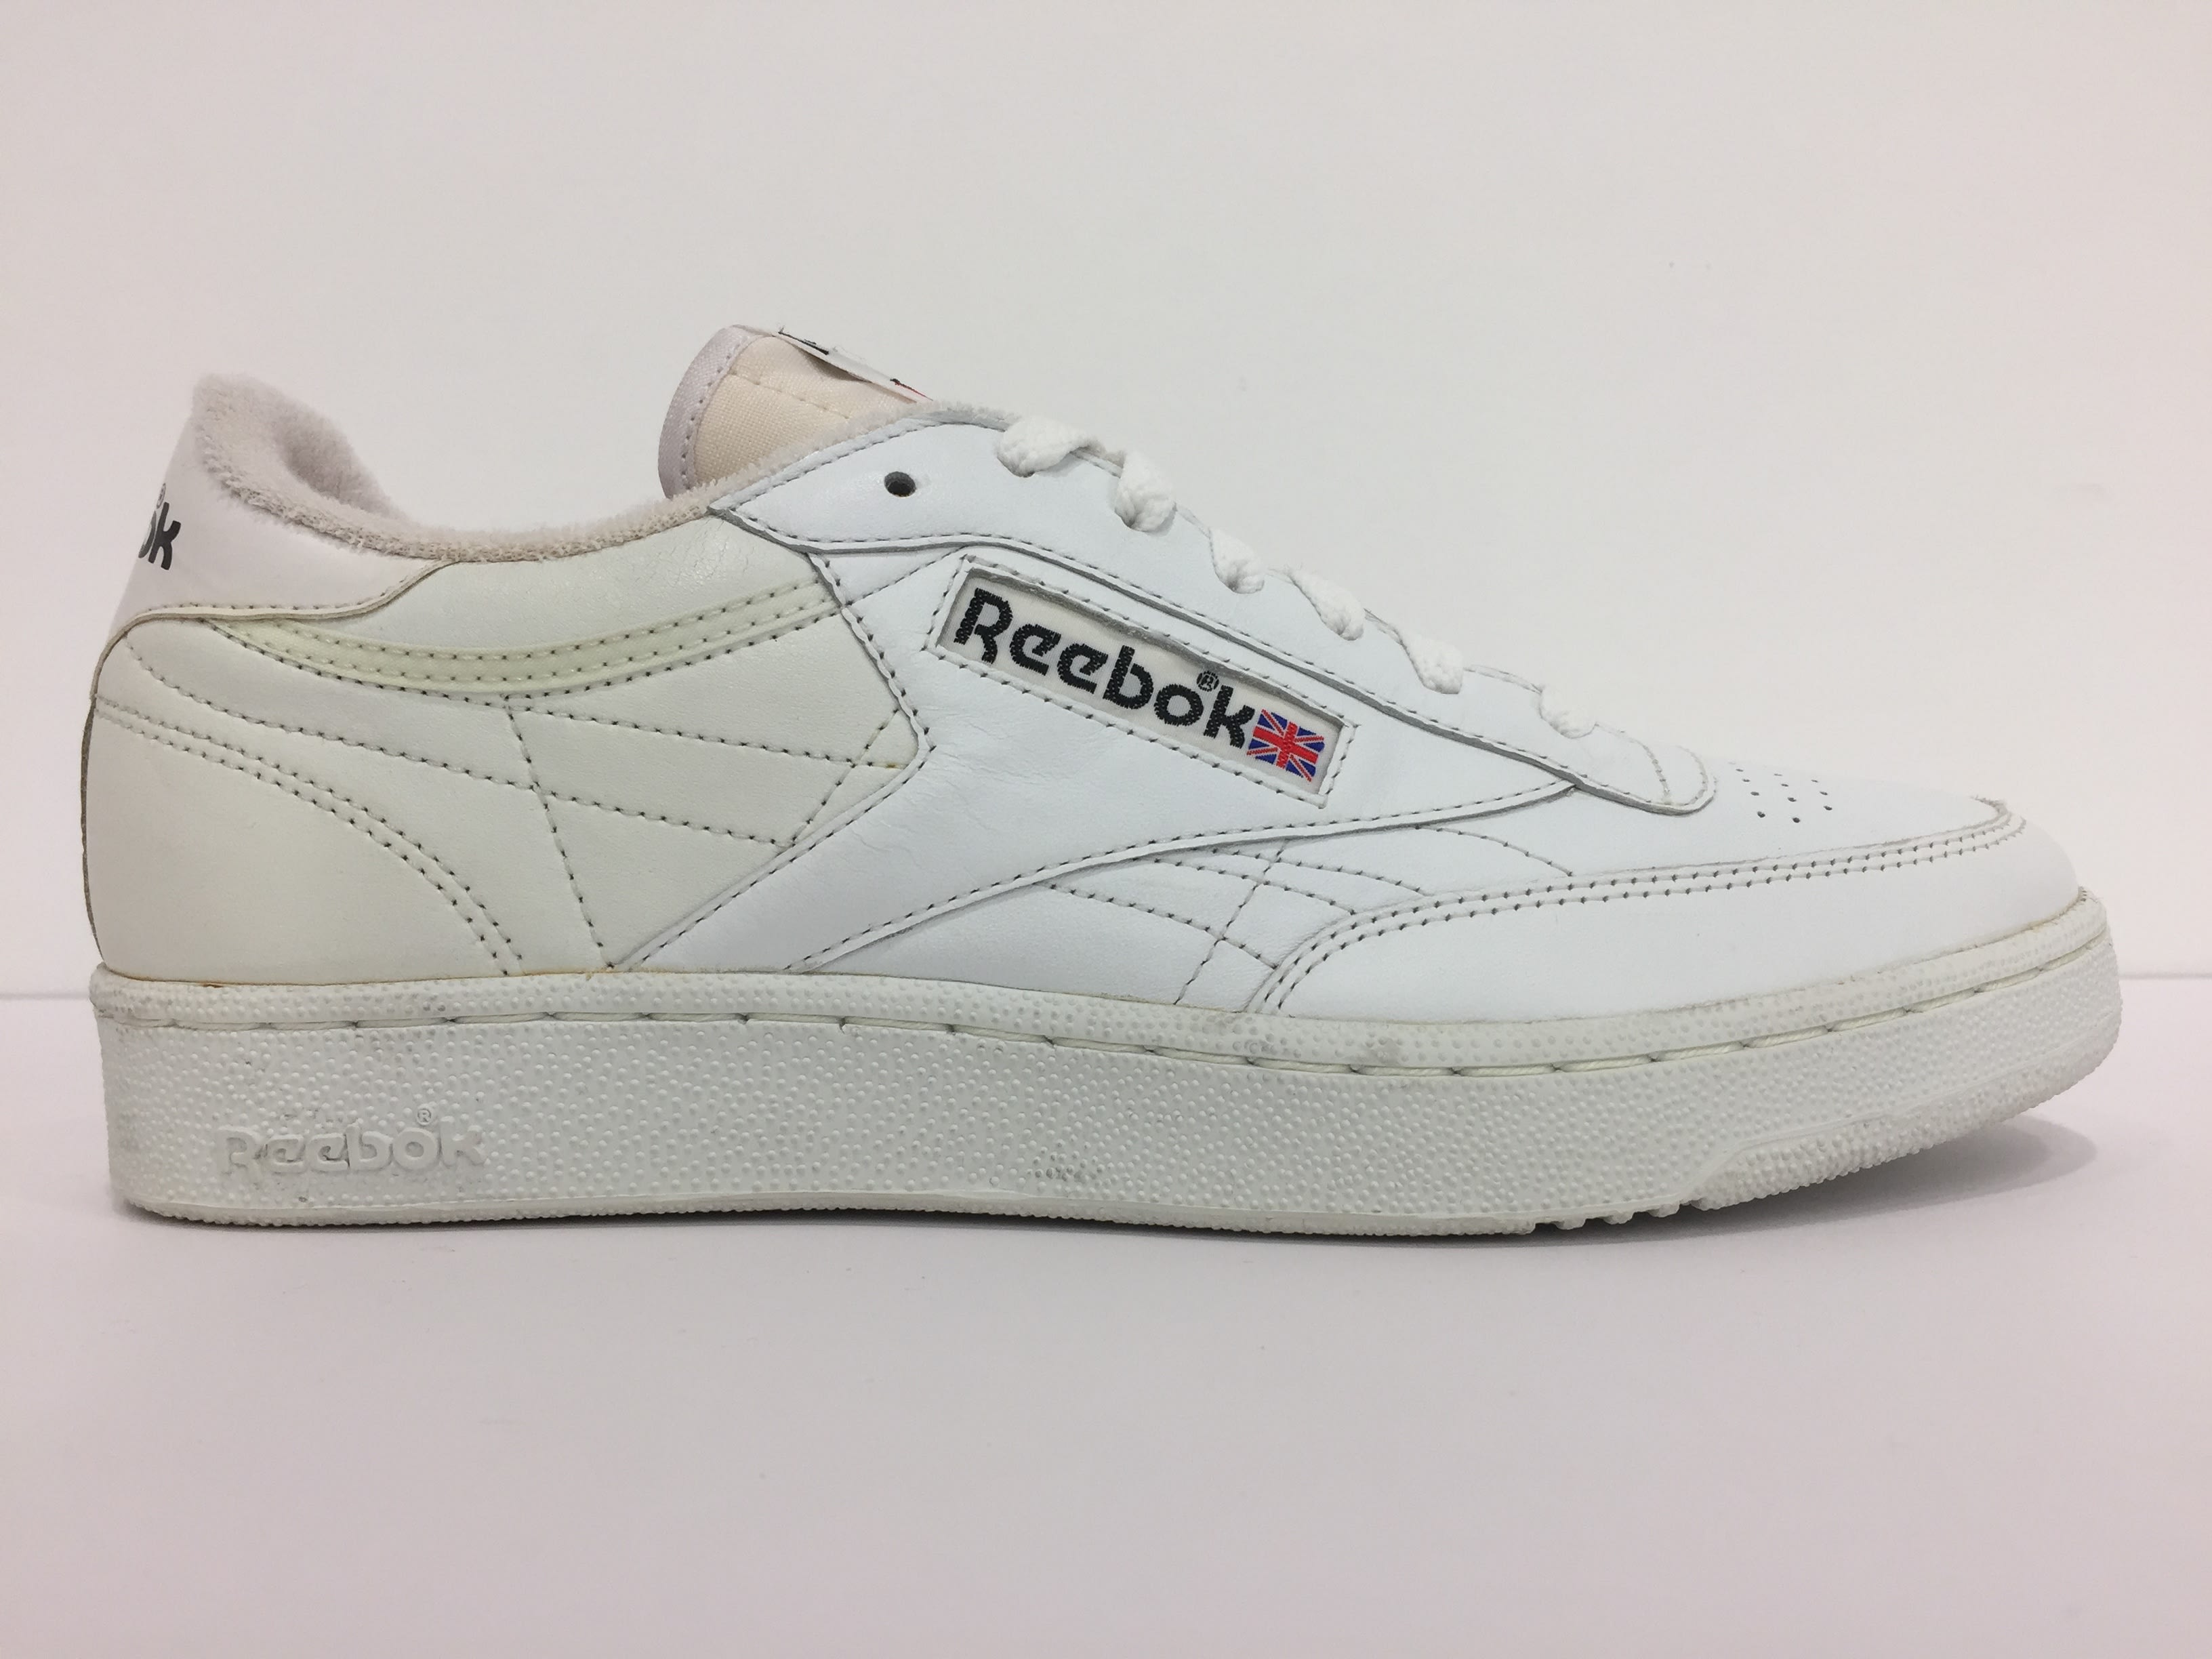 What Reebok Shoes Were in Style in 87?